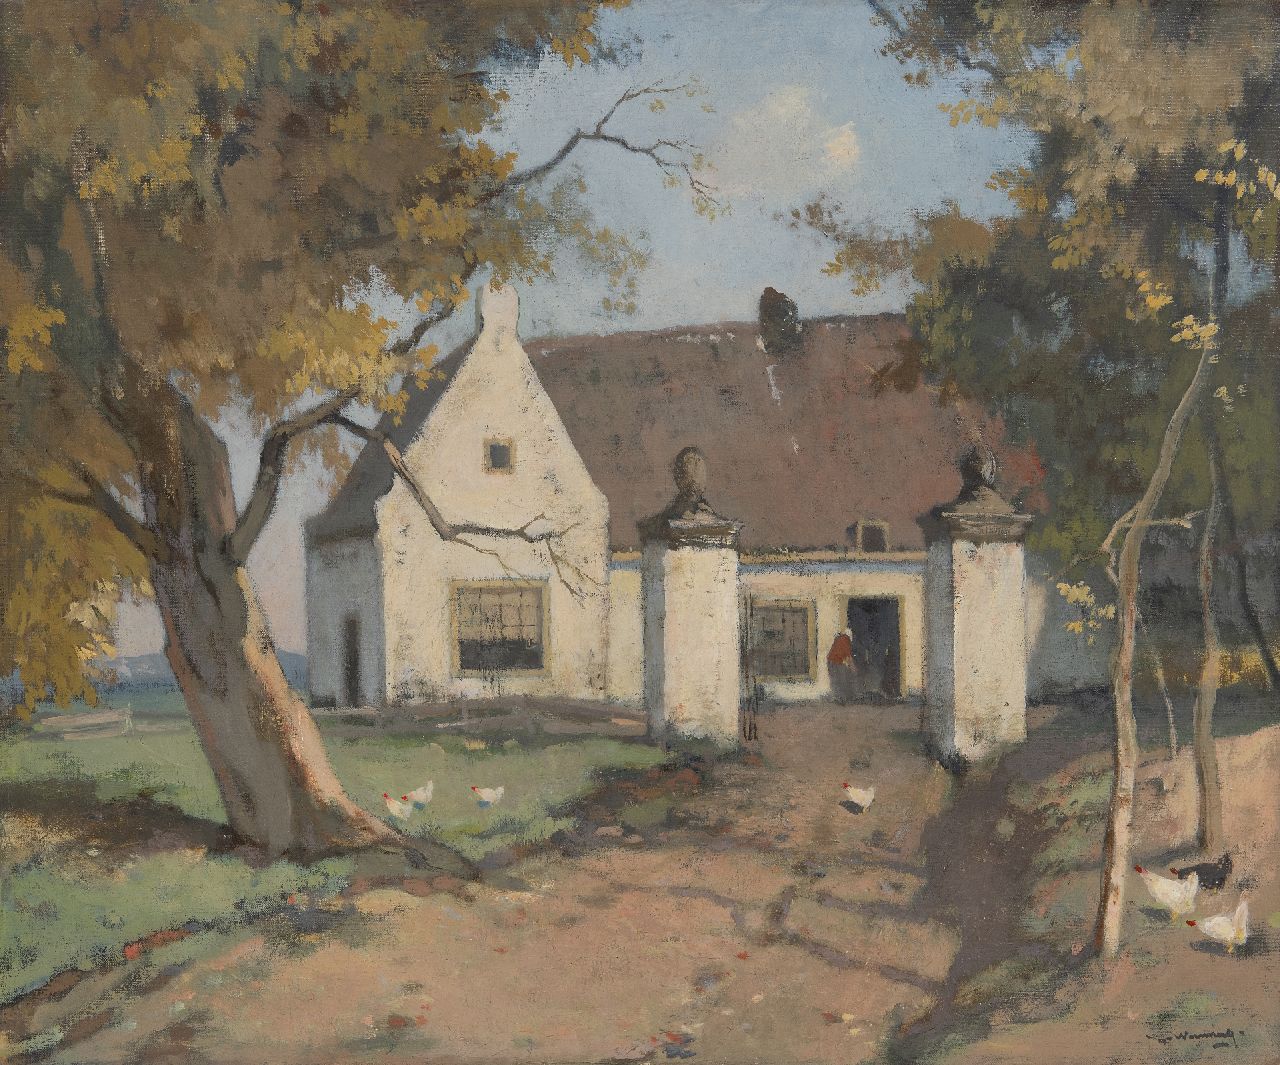 Ype Wenning | Farmyard with farmer's wife and chickens, oil on canvas, 50.1 x 60.3 cm, signed l.r.